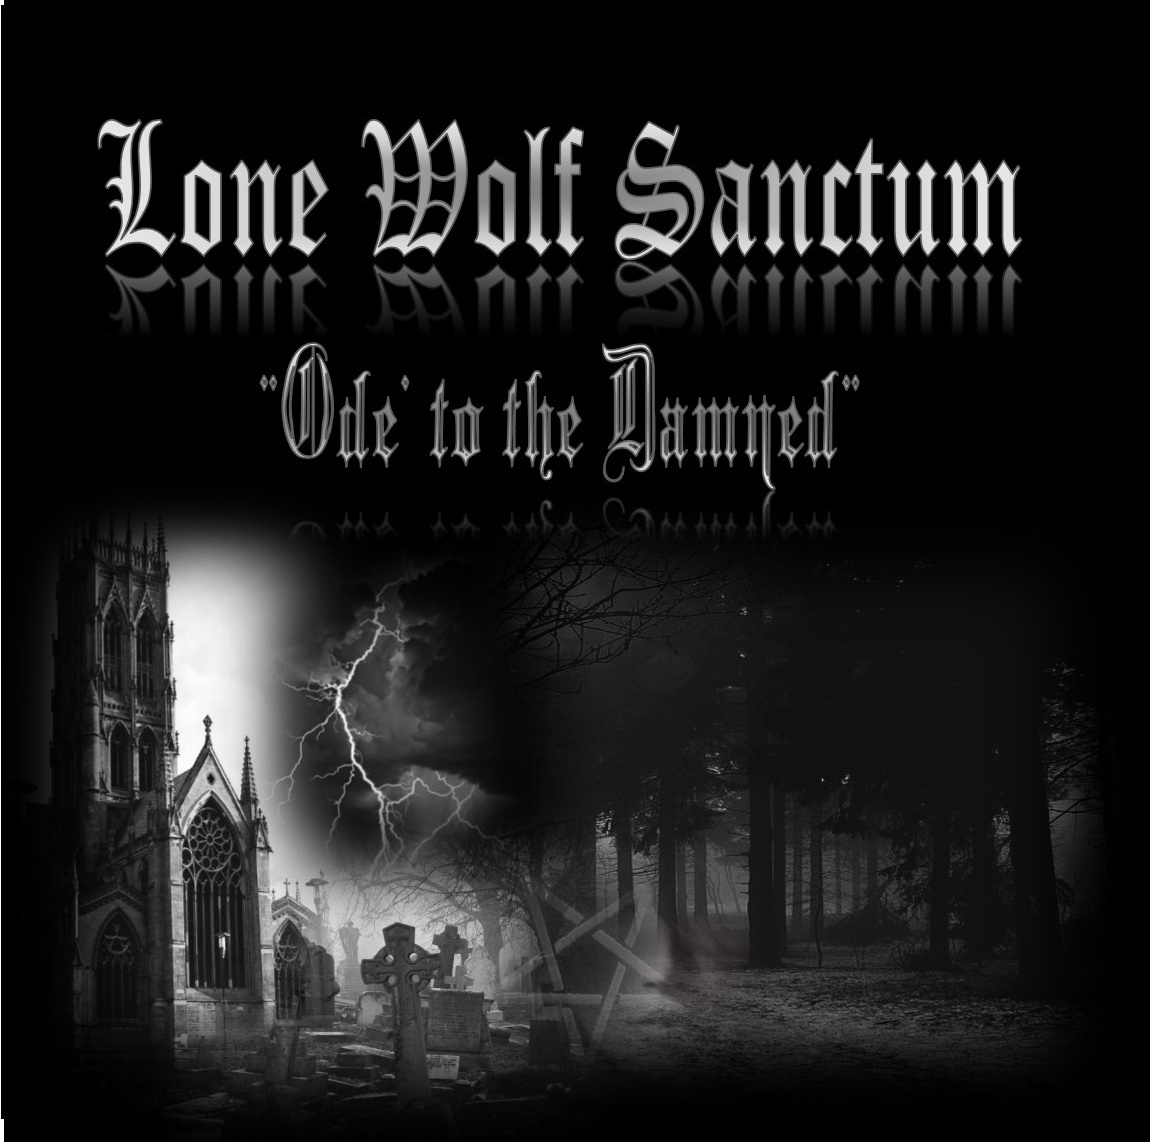 Lone Wolf Sanctum Ode to the Damned Promo A